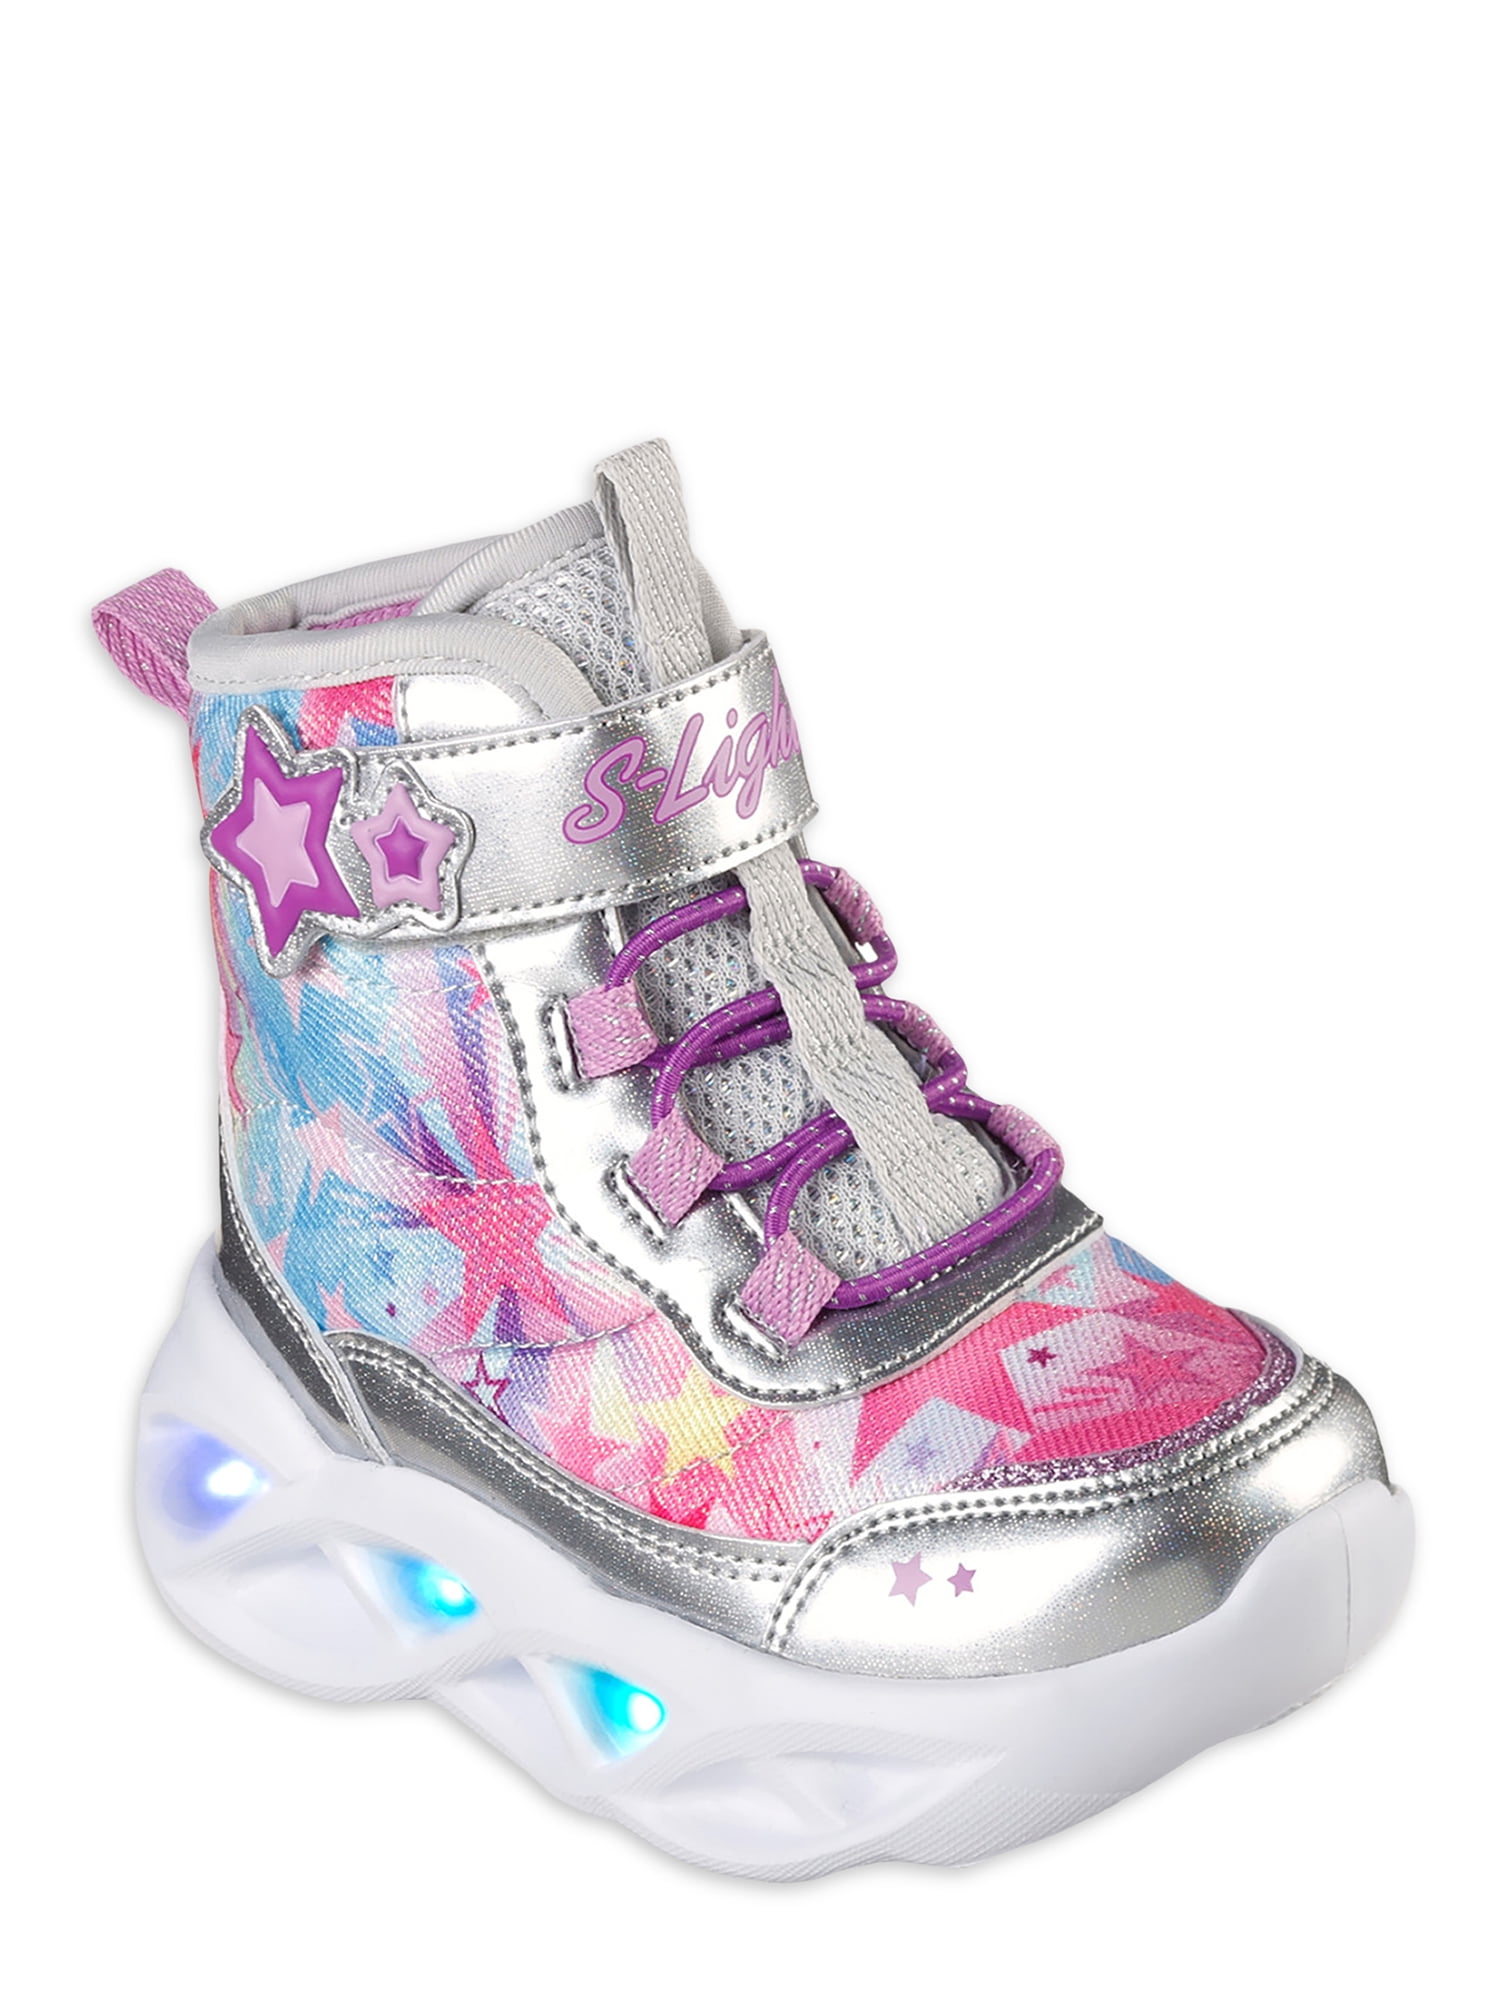 Skechers Toddler Twistry Brights- Sweet Starz Lighted Snow Boots Walmart.com